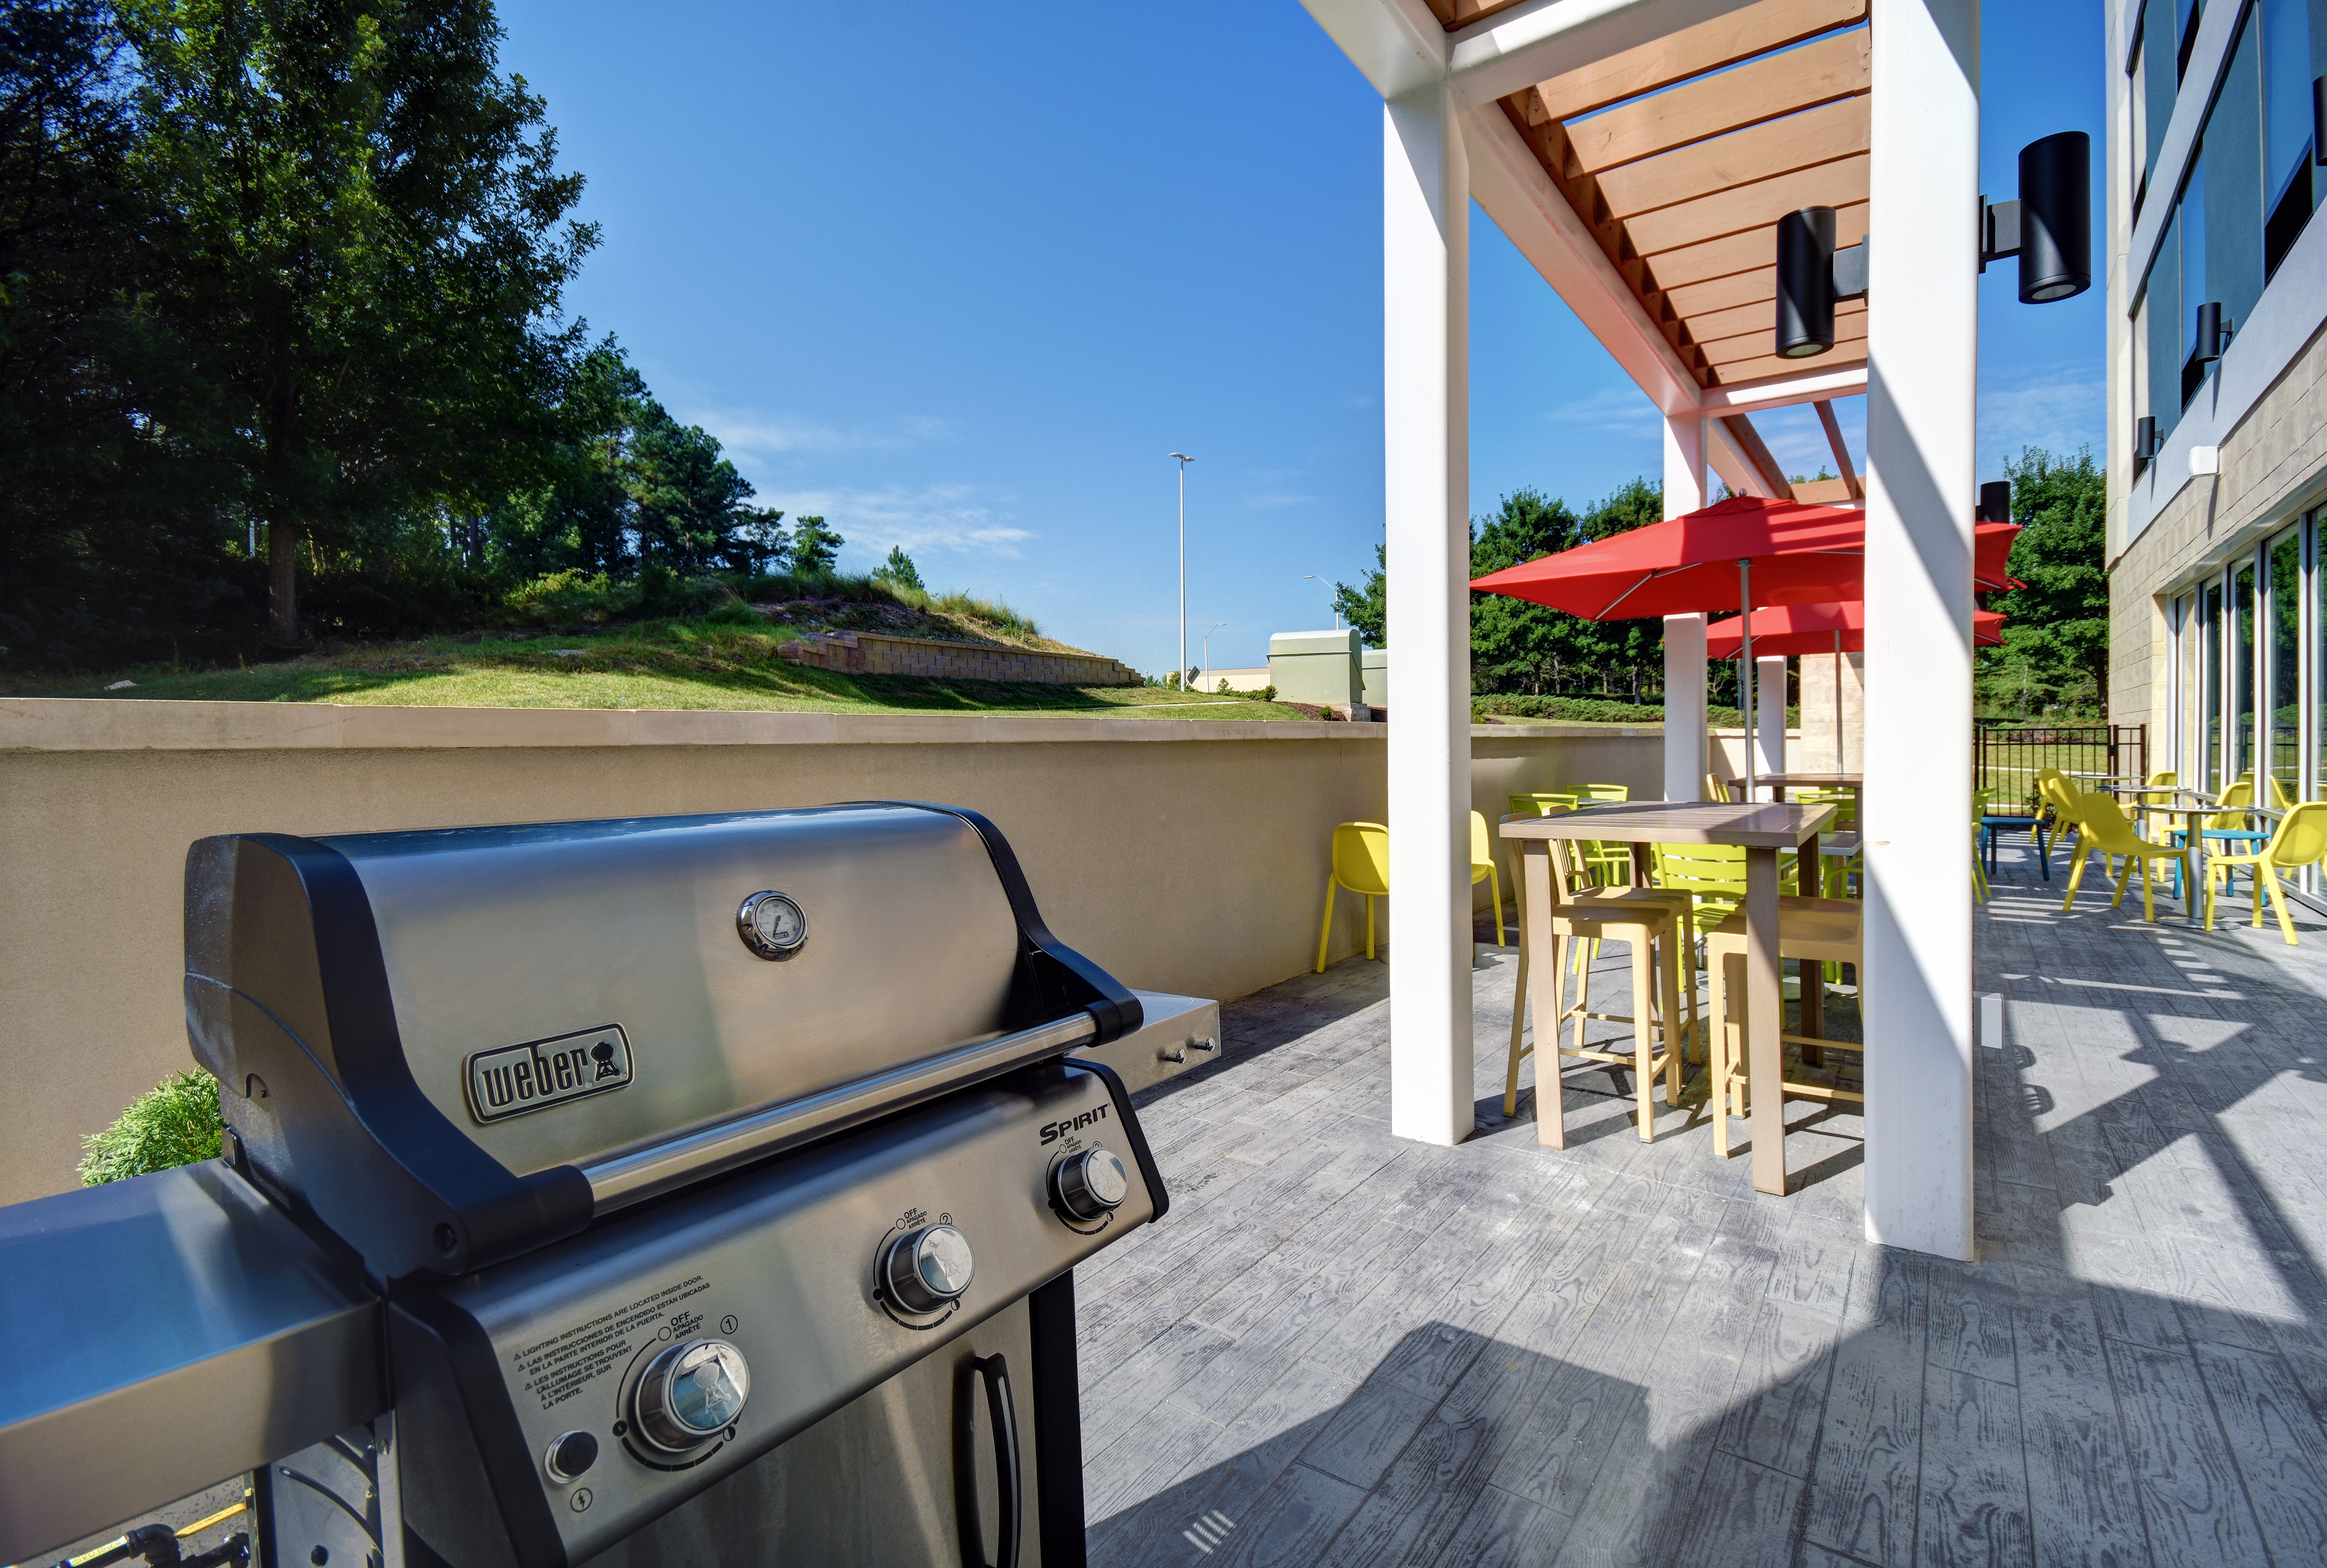 Outdoor Patio With Grills